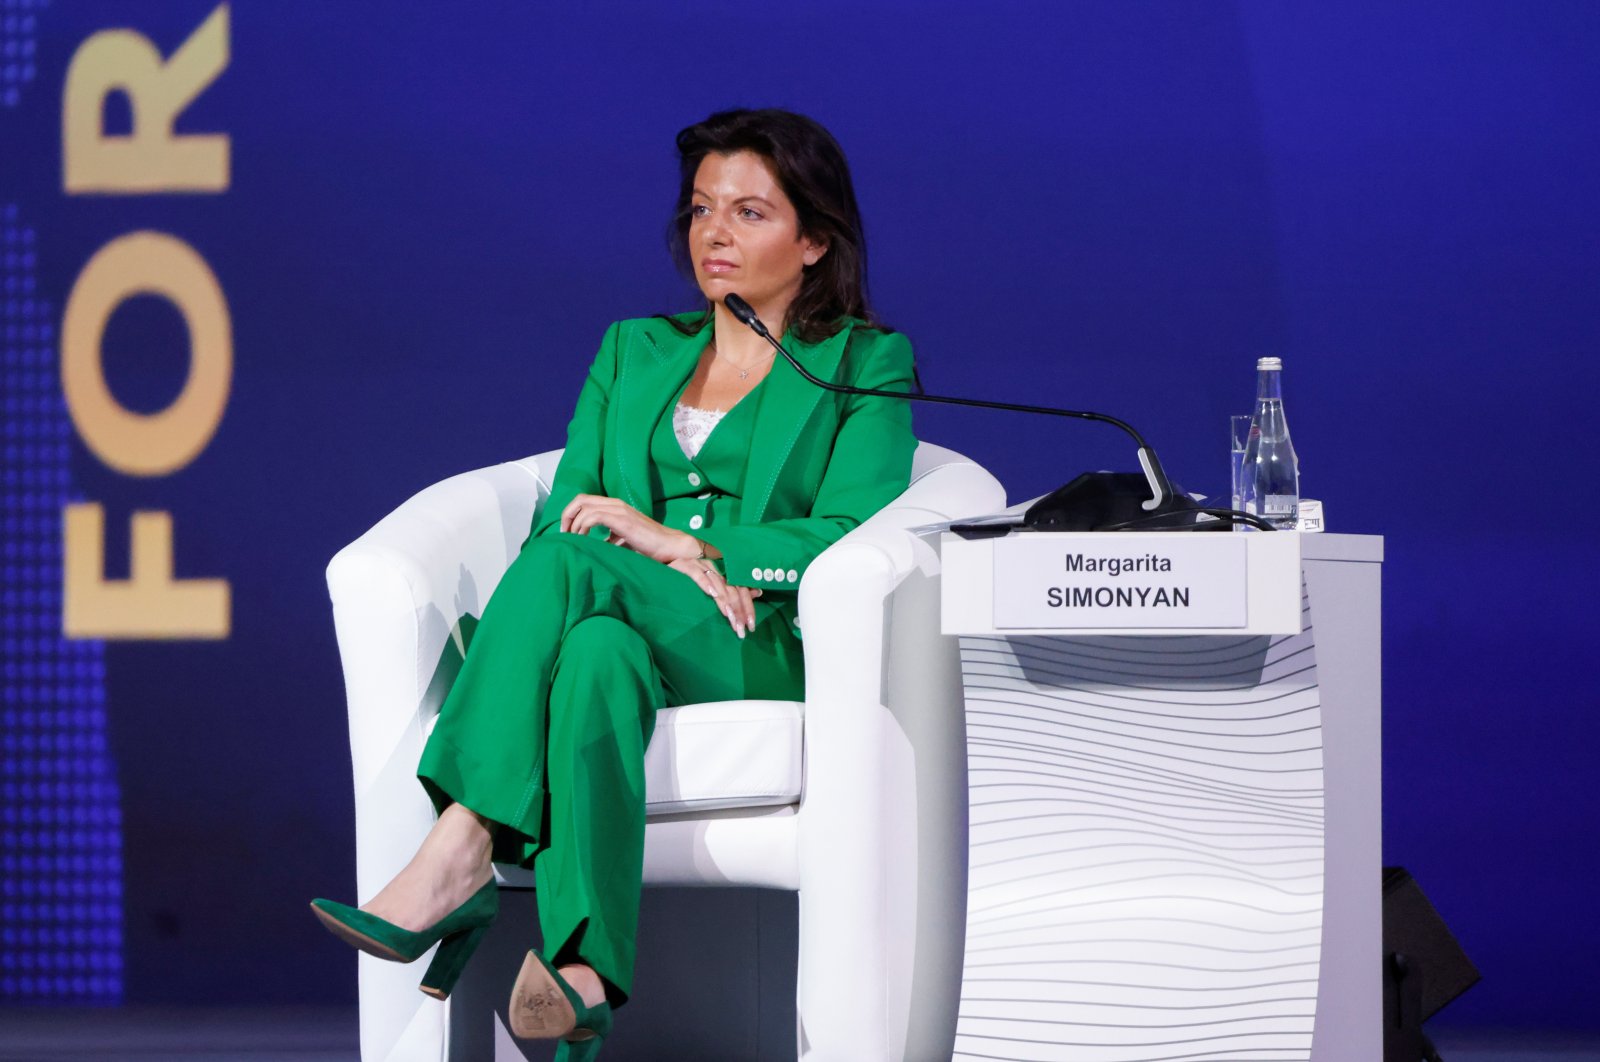 RT editor-in-chief and session moderator Margarita Simonyan attends the St. Petersburg International Economic Forum (SPIEF) in Saint Petersburg, Russia June 17, 2022. (Reuters File Photo)